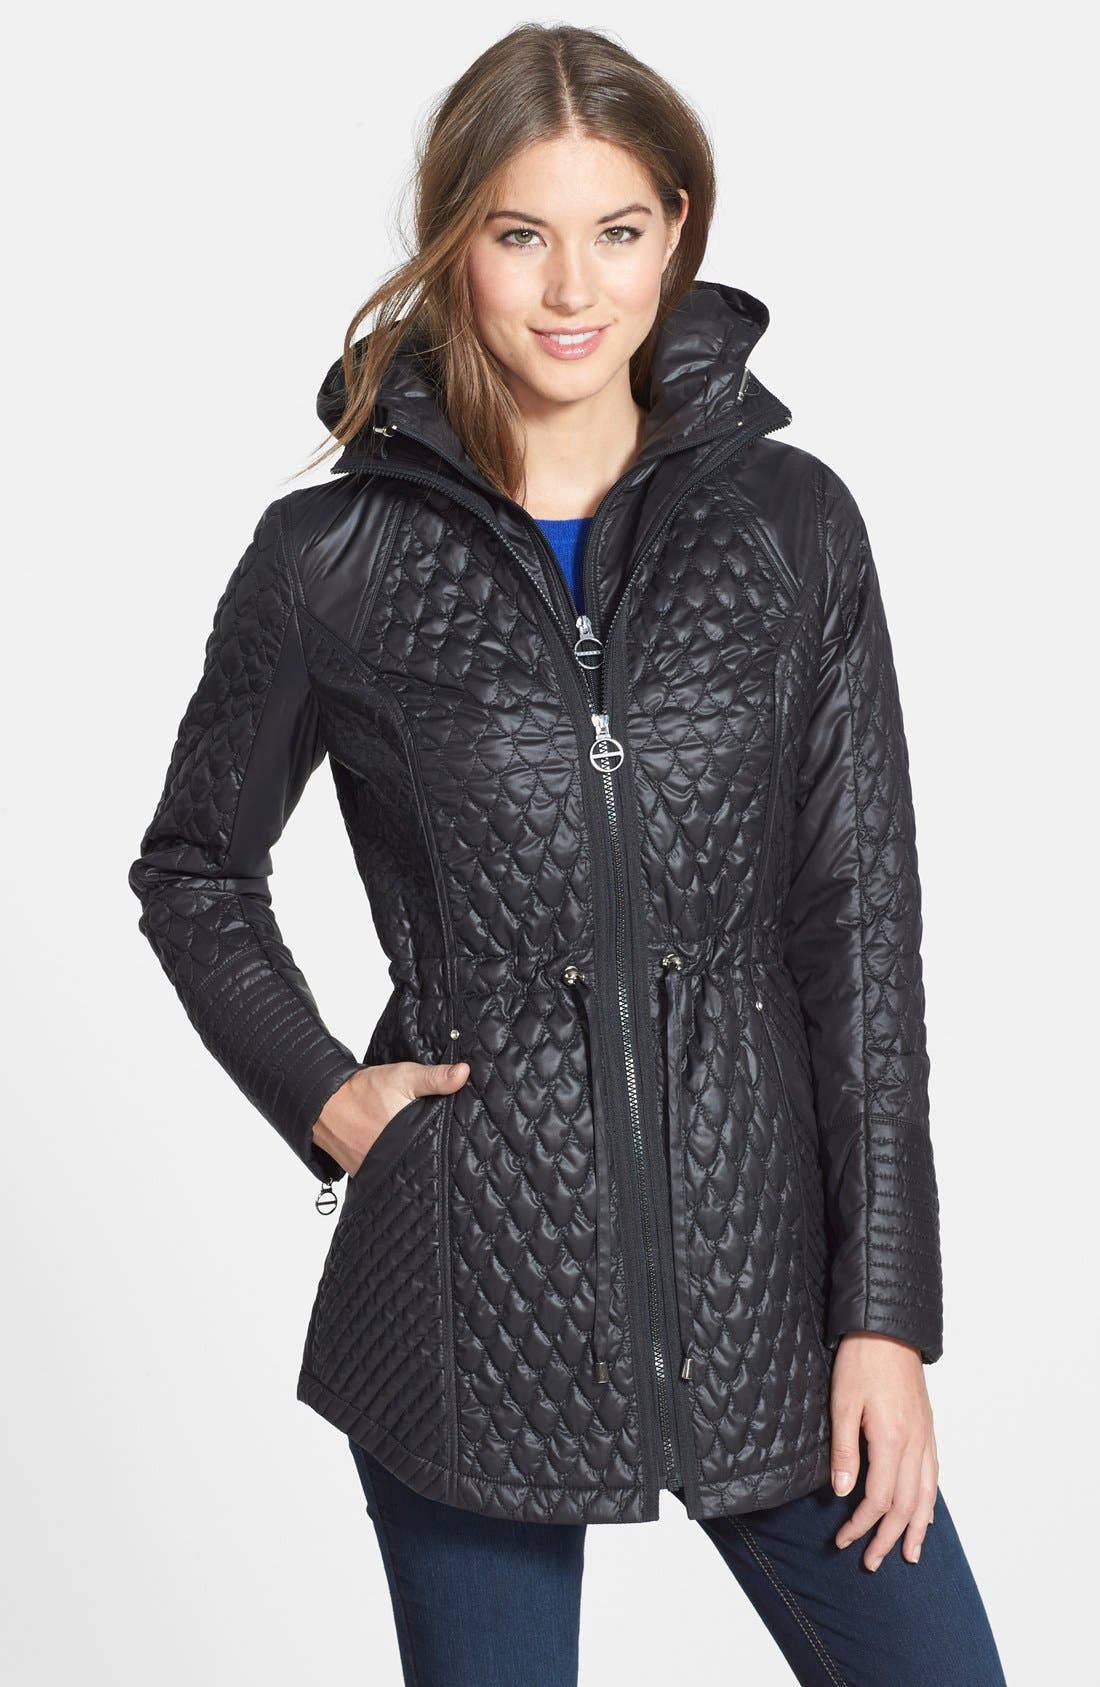 laundry by shelli segal quilted hooded jacket